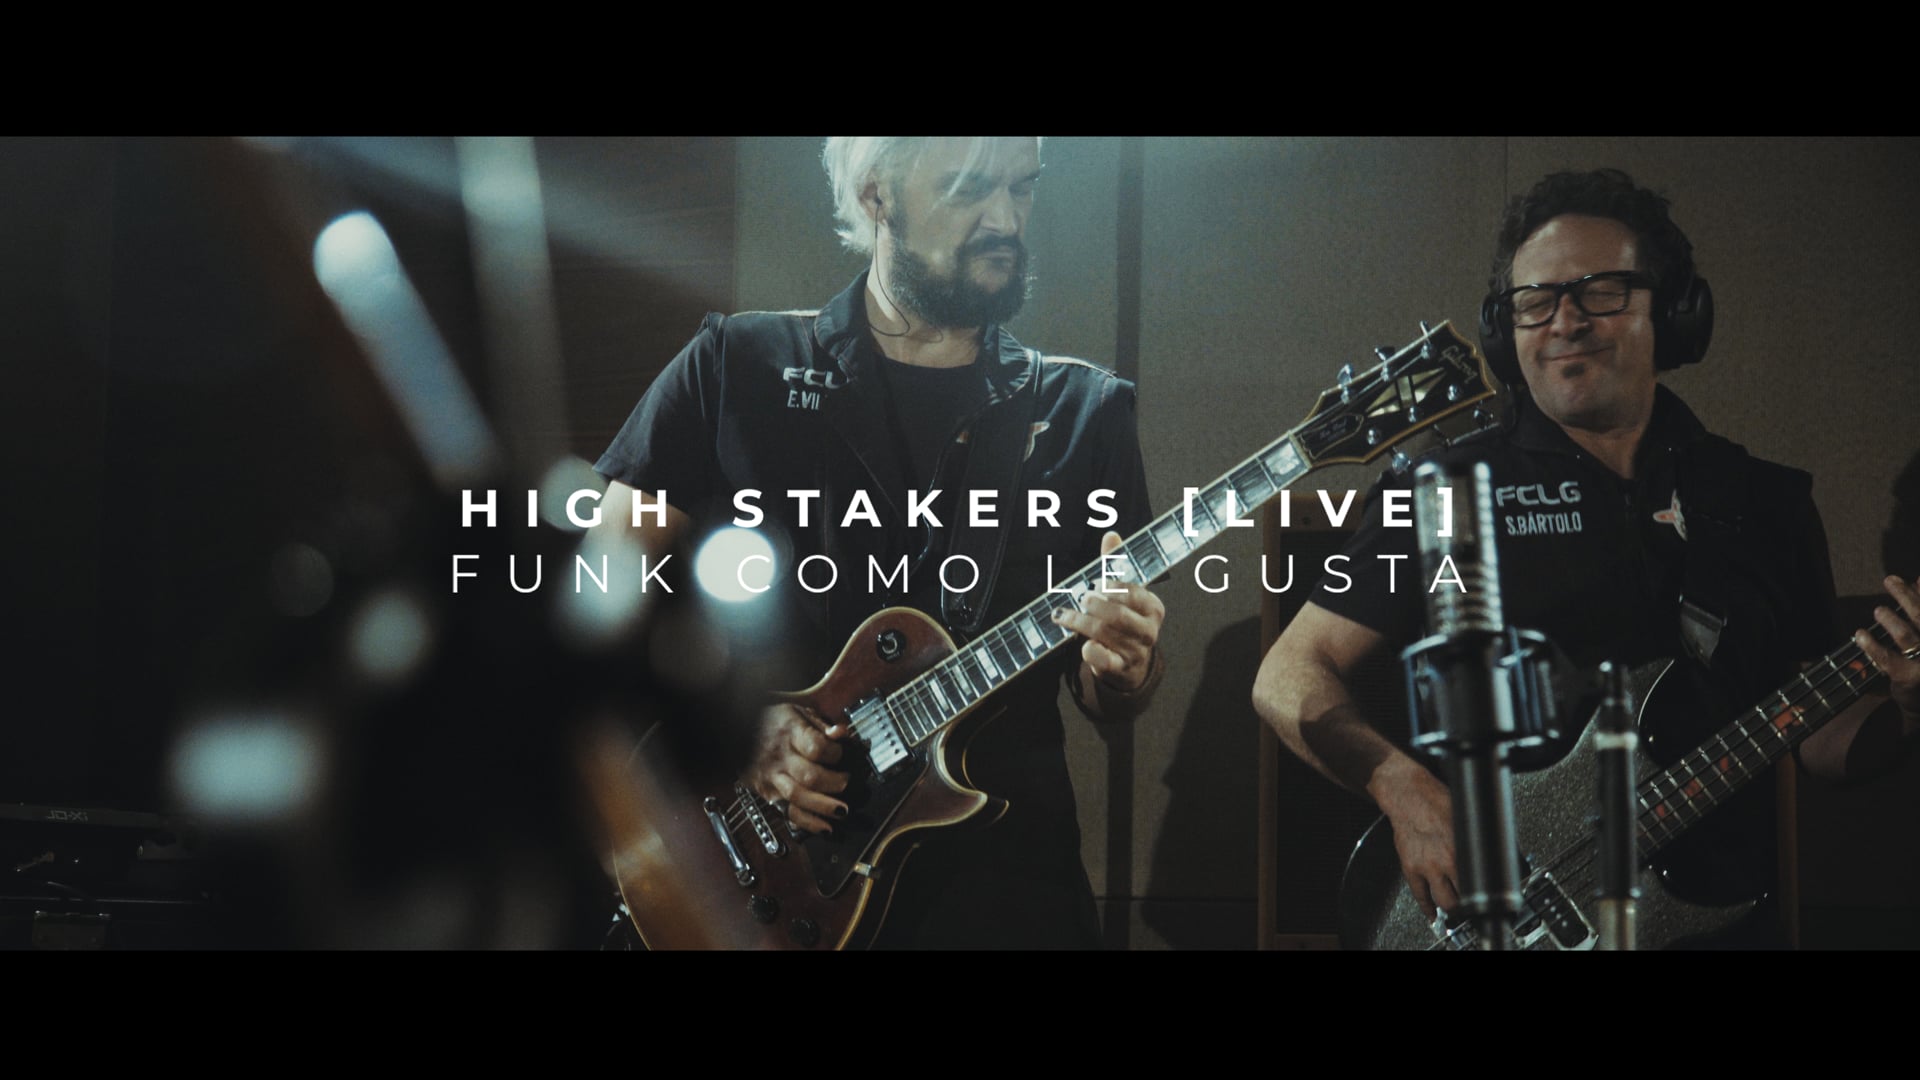 FUNK COMO LE GUSTA | High Stakers [LIVE SESSION]